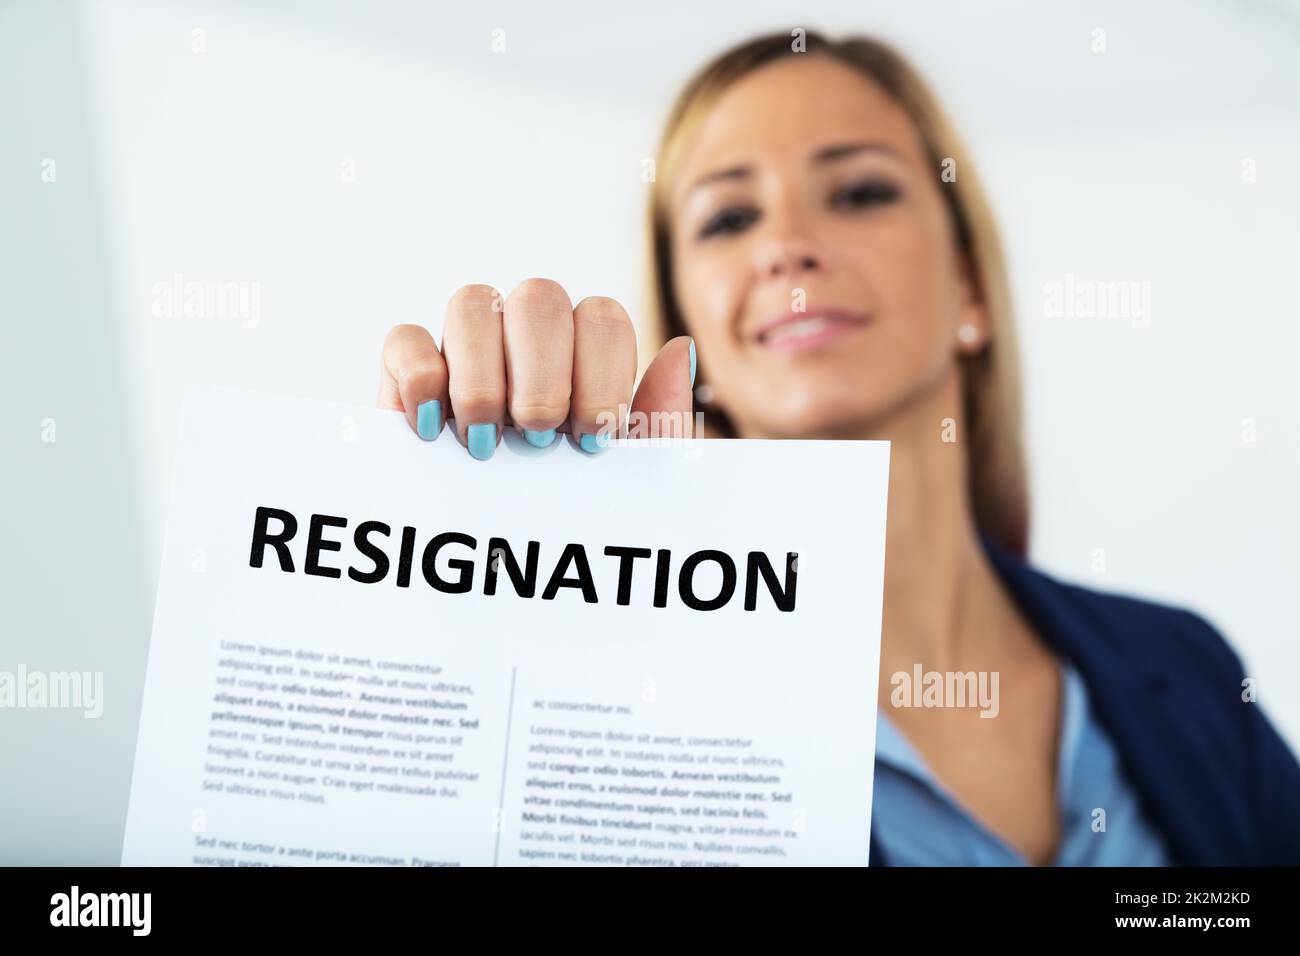 woman resigning with a smile on her face Stock Photo